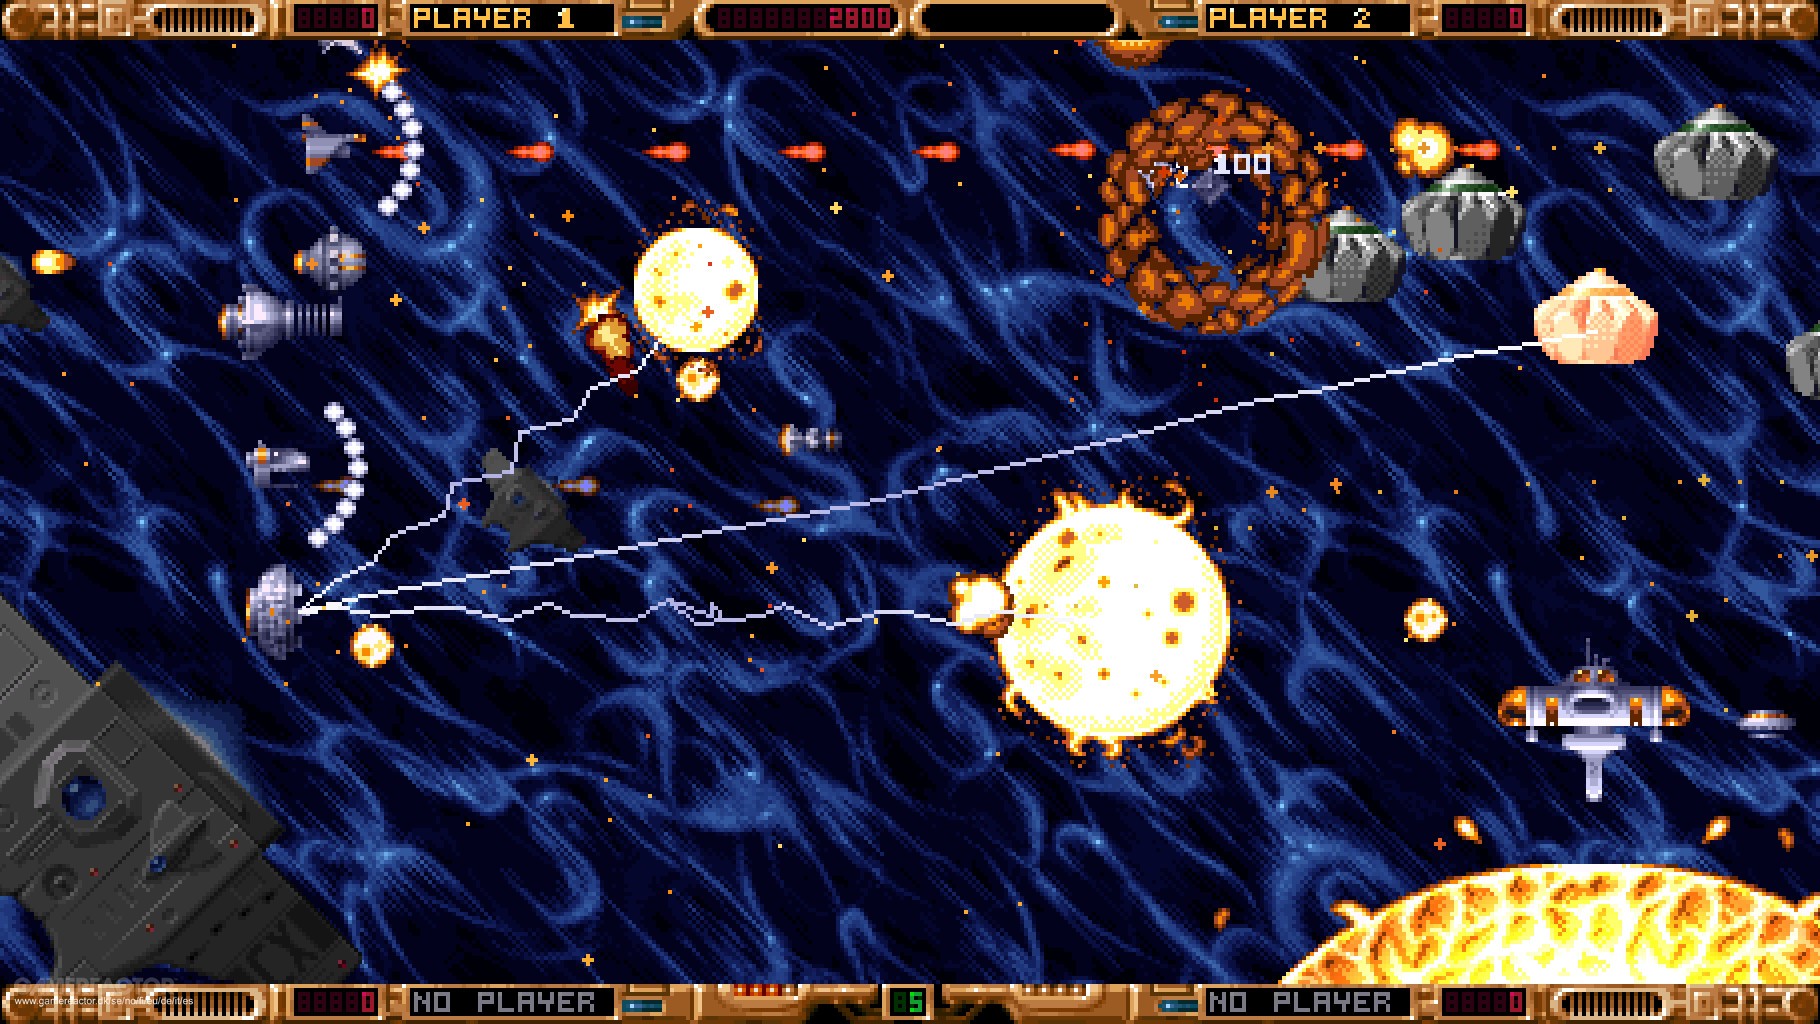 Screenshot from the game 1993 Space Machine